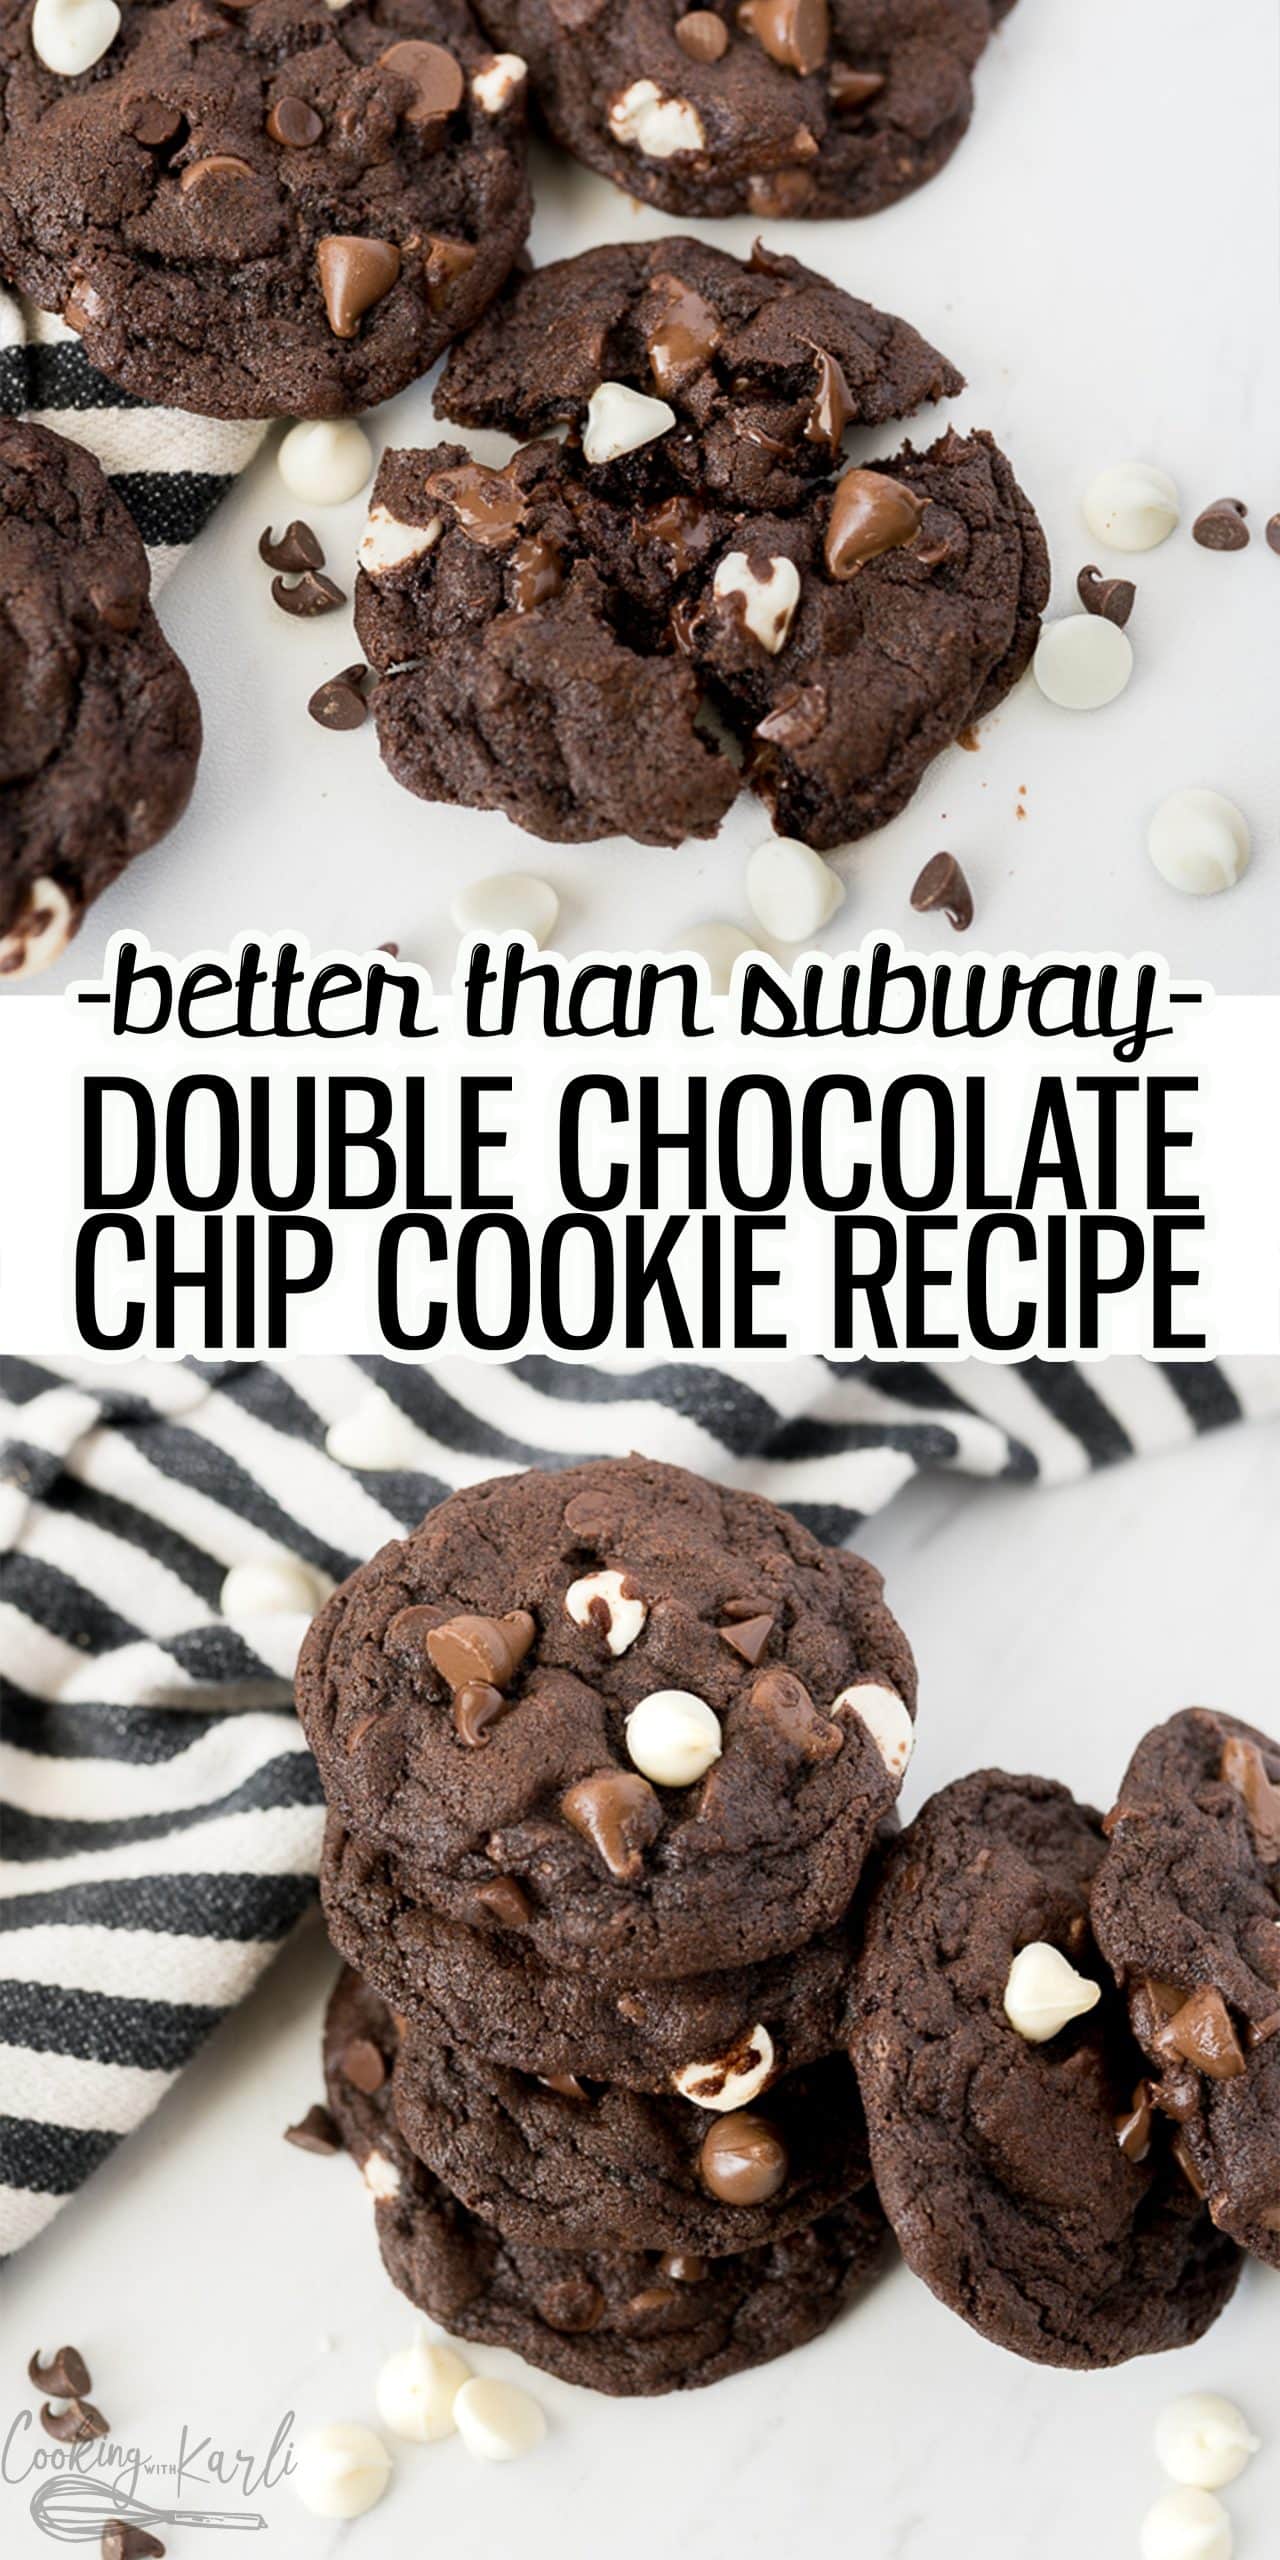 Pin image for double chocolate chip cookies